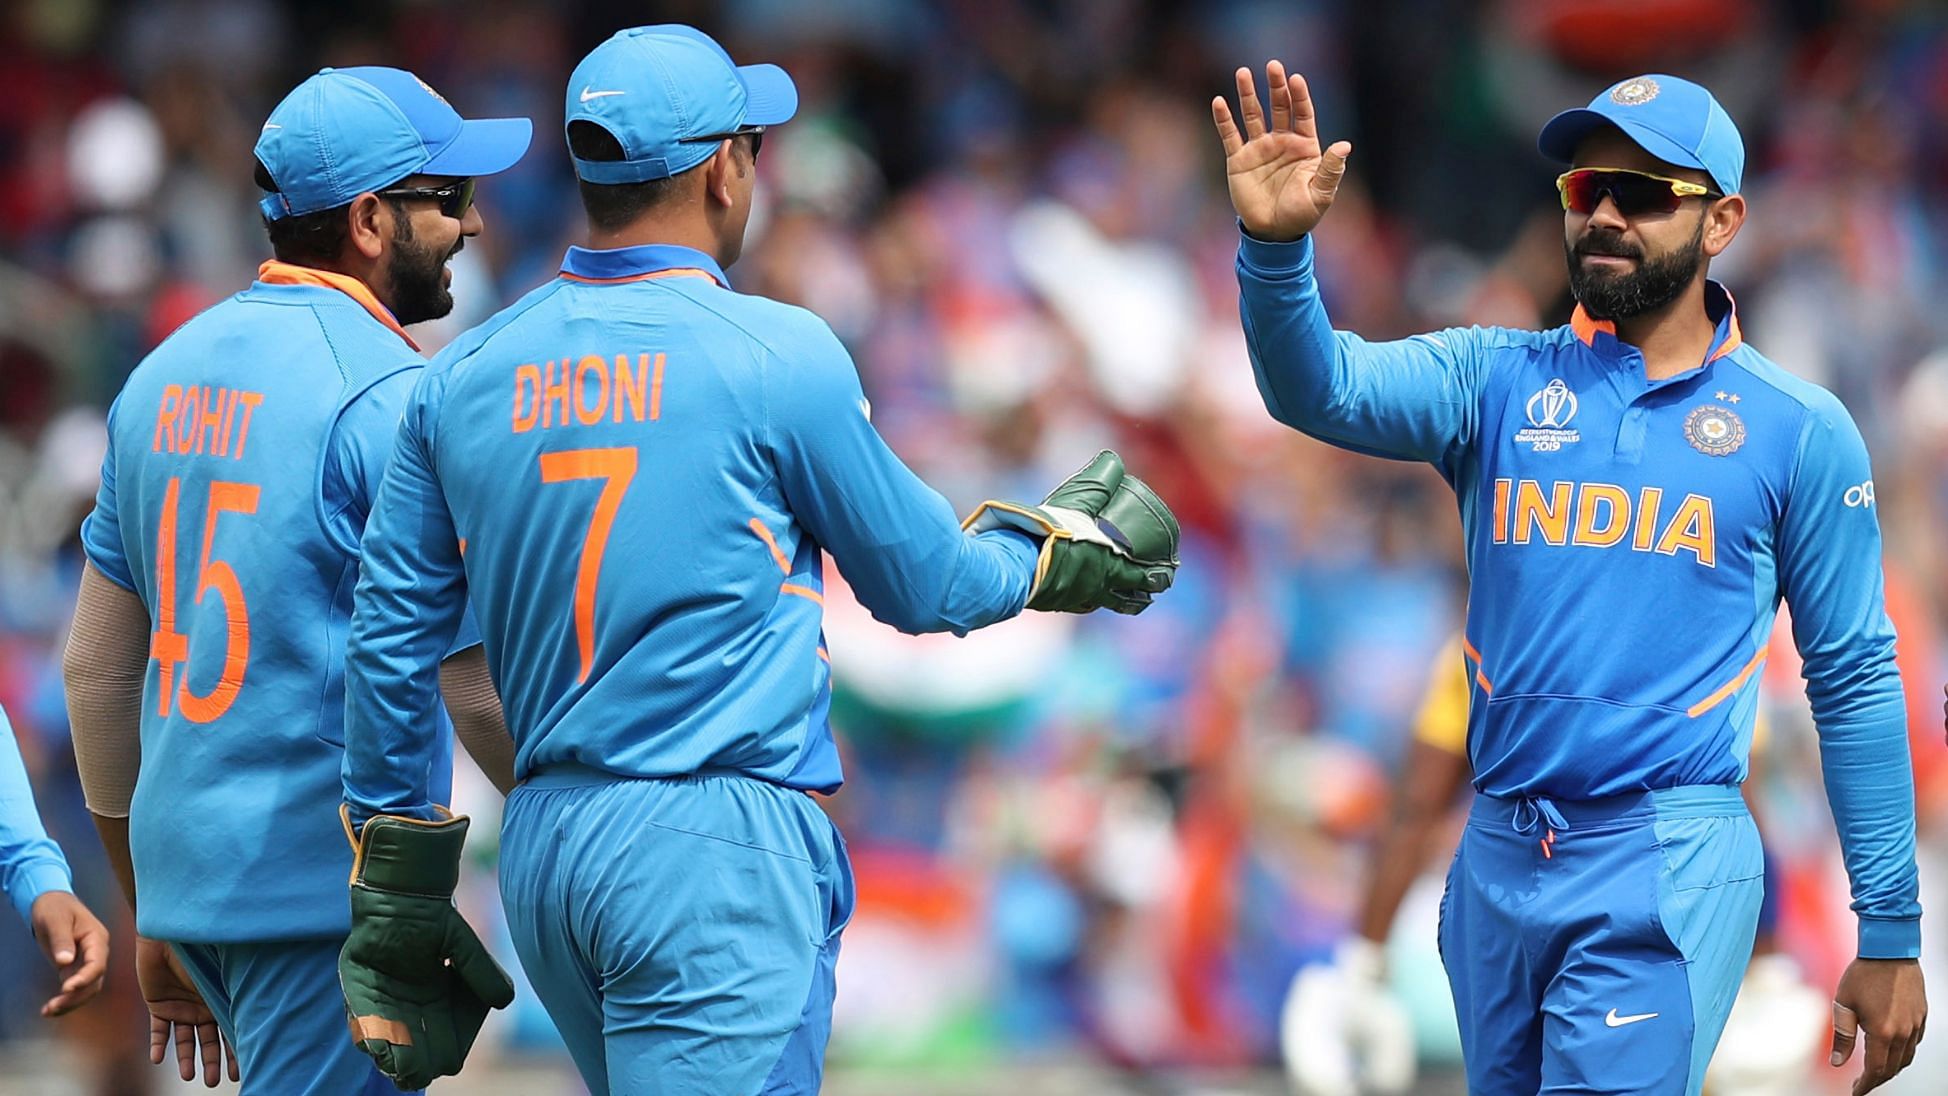 Indian cricketers celebrate the dismissal of Sri Lanka’s Kusal Perera, caught out by India’s Mahendra Singh Dhoni, center left, on Jasprit Bumrah’s, second right, bowling during the Cricket World Cup match.